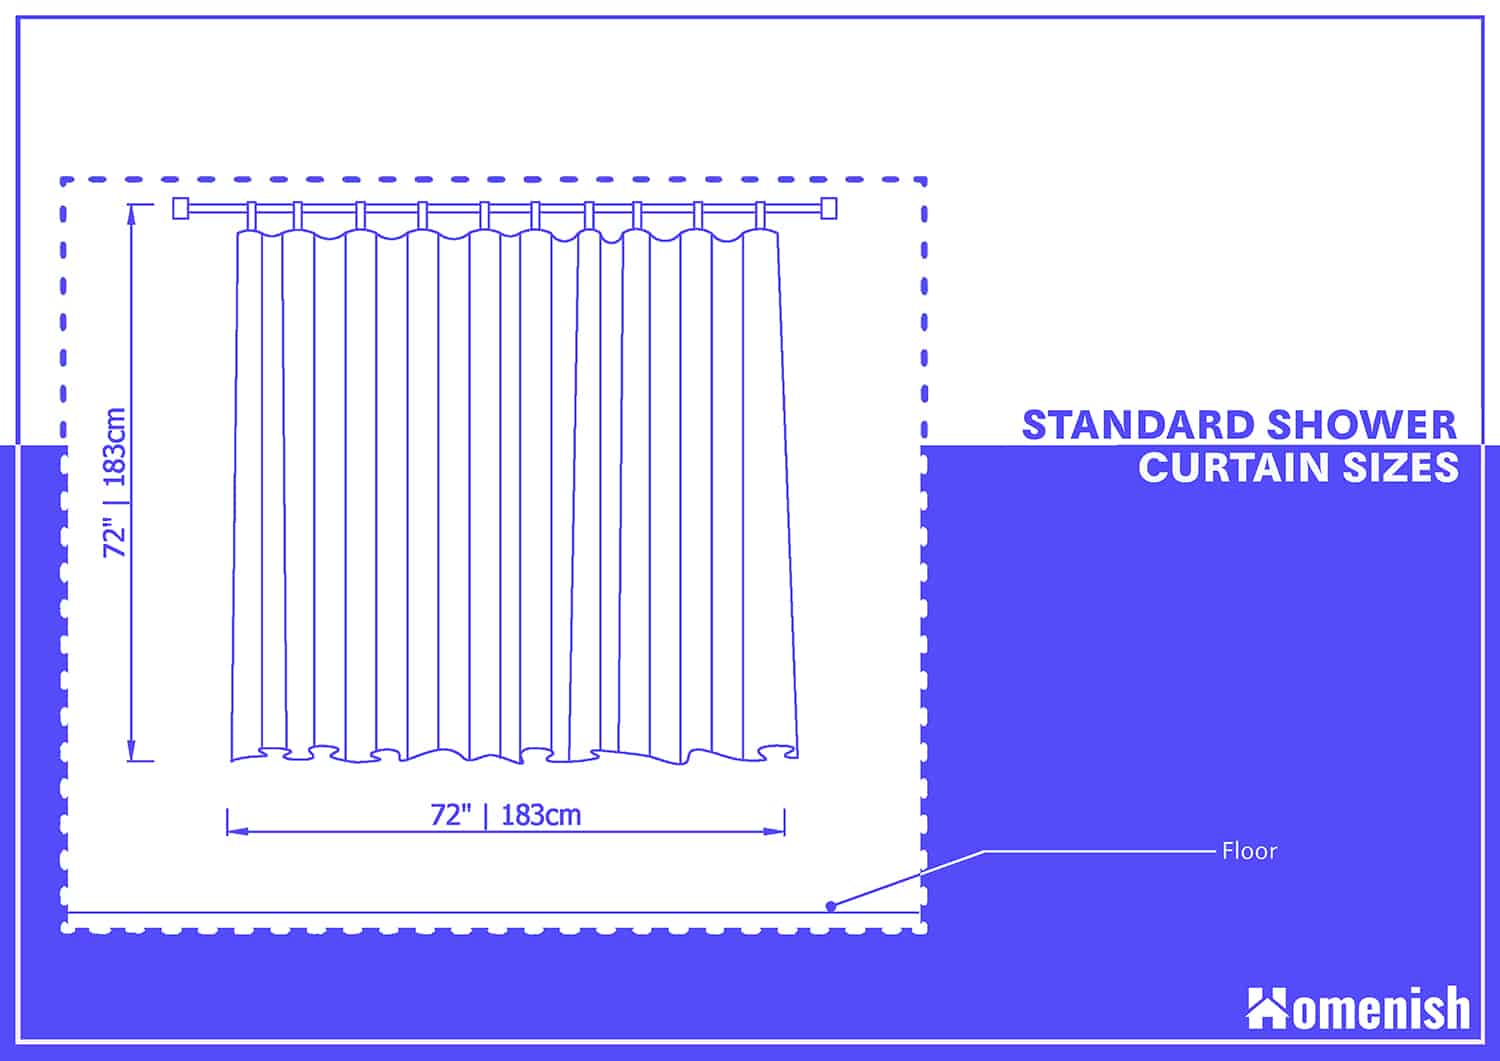 Standard Shower Curtain Size, What Widths Do Shower Curtains Come In